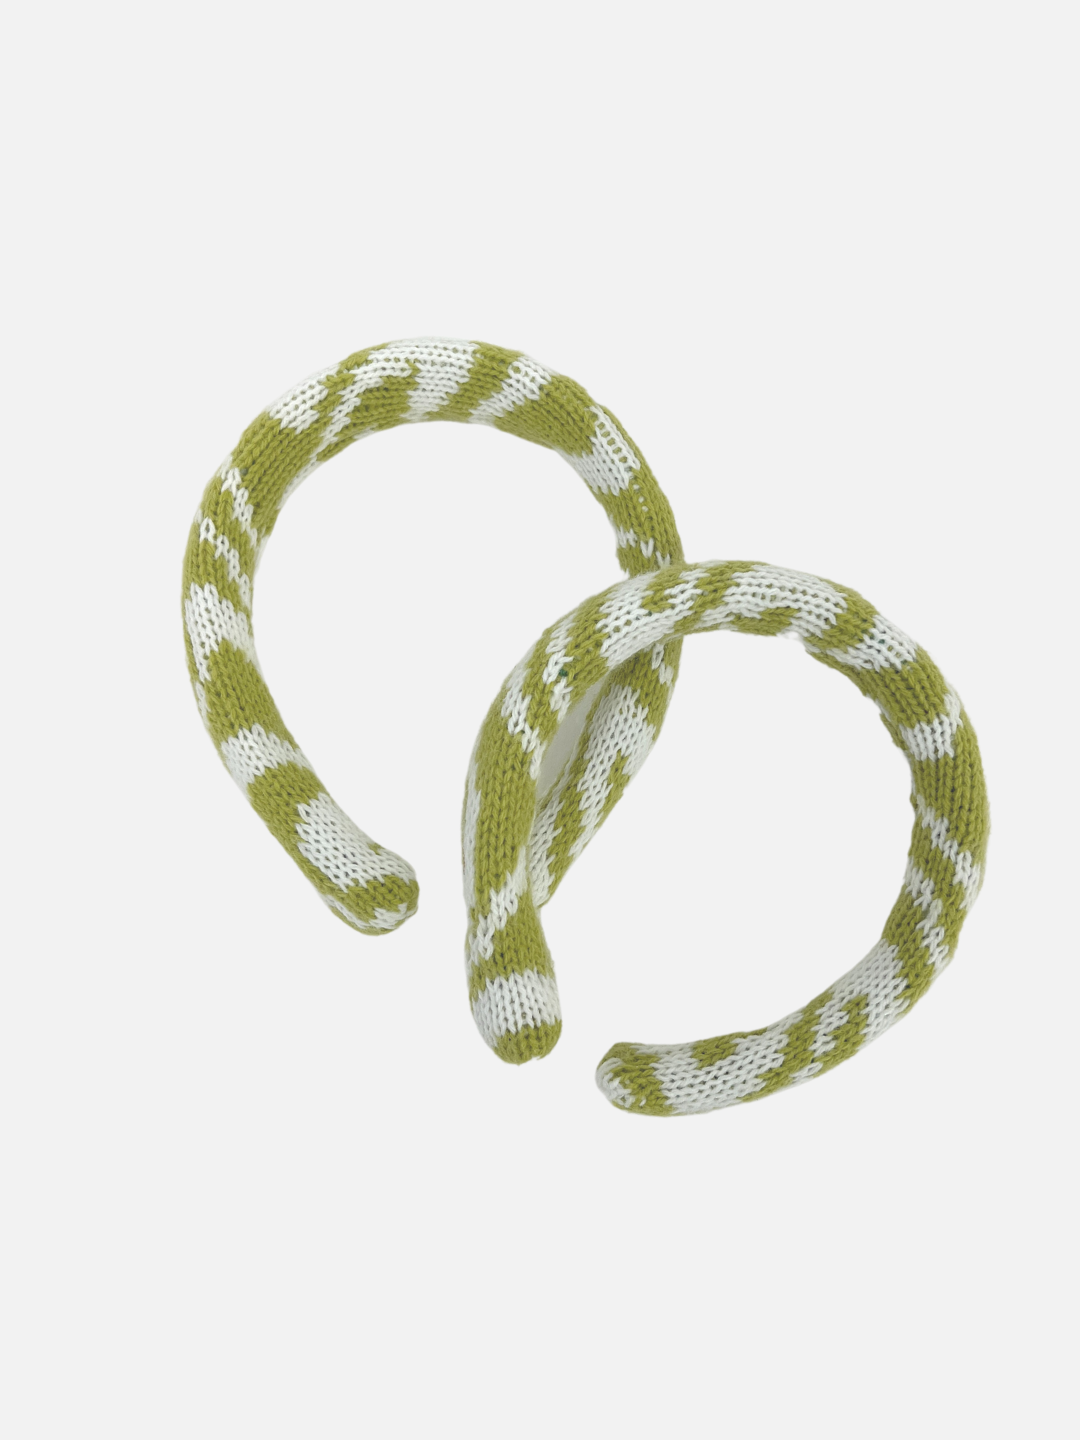 Two sizes of kids' knitted headband in swirls of pale green and white